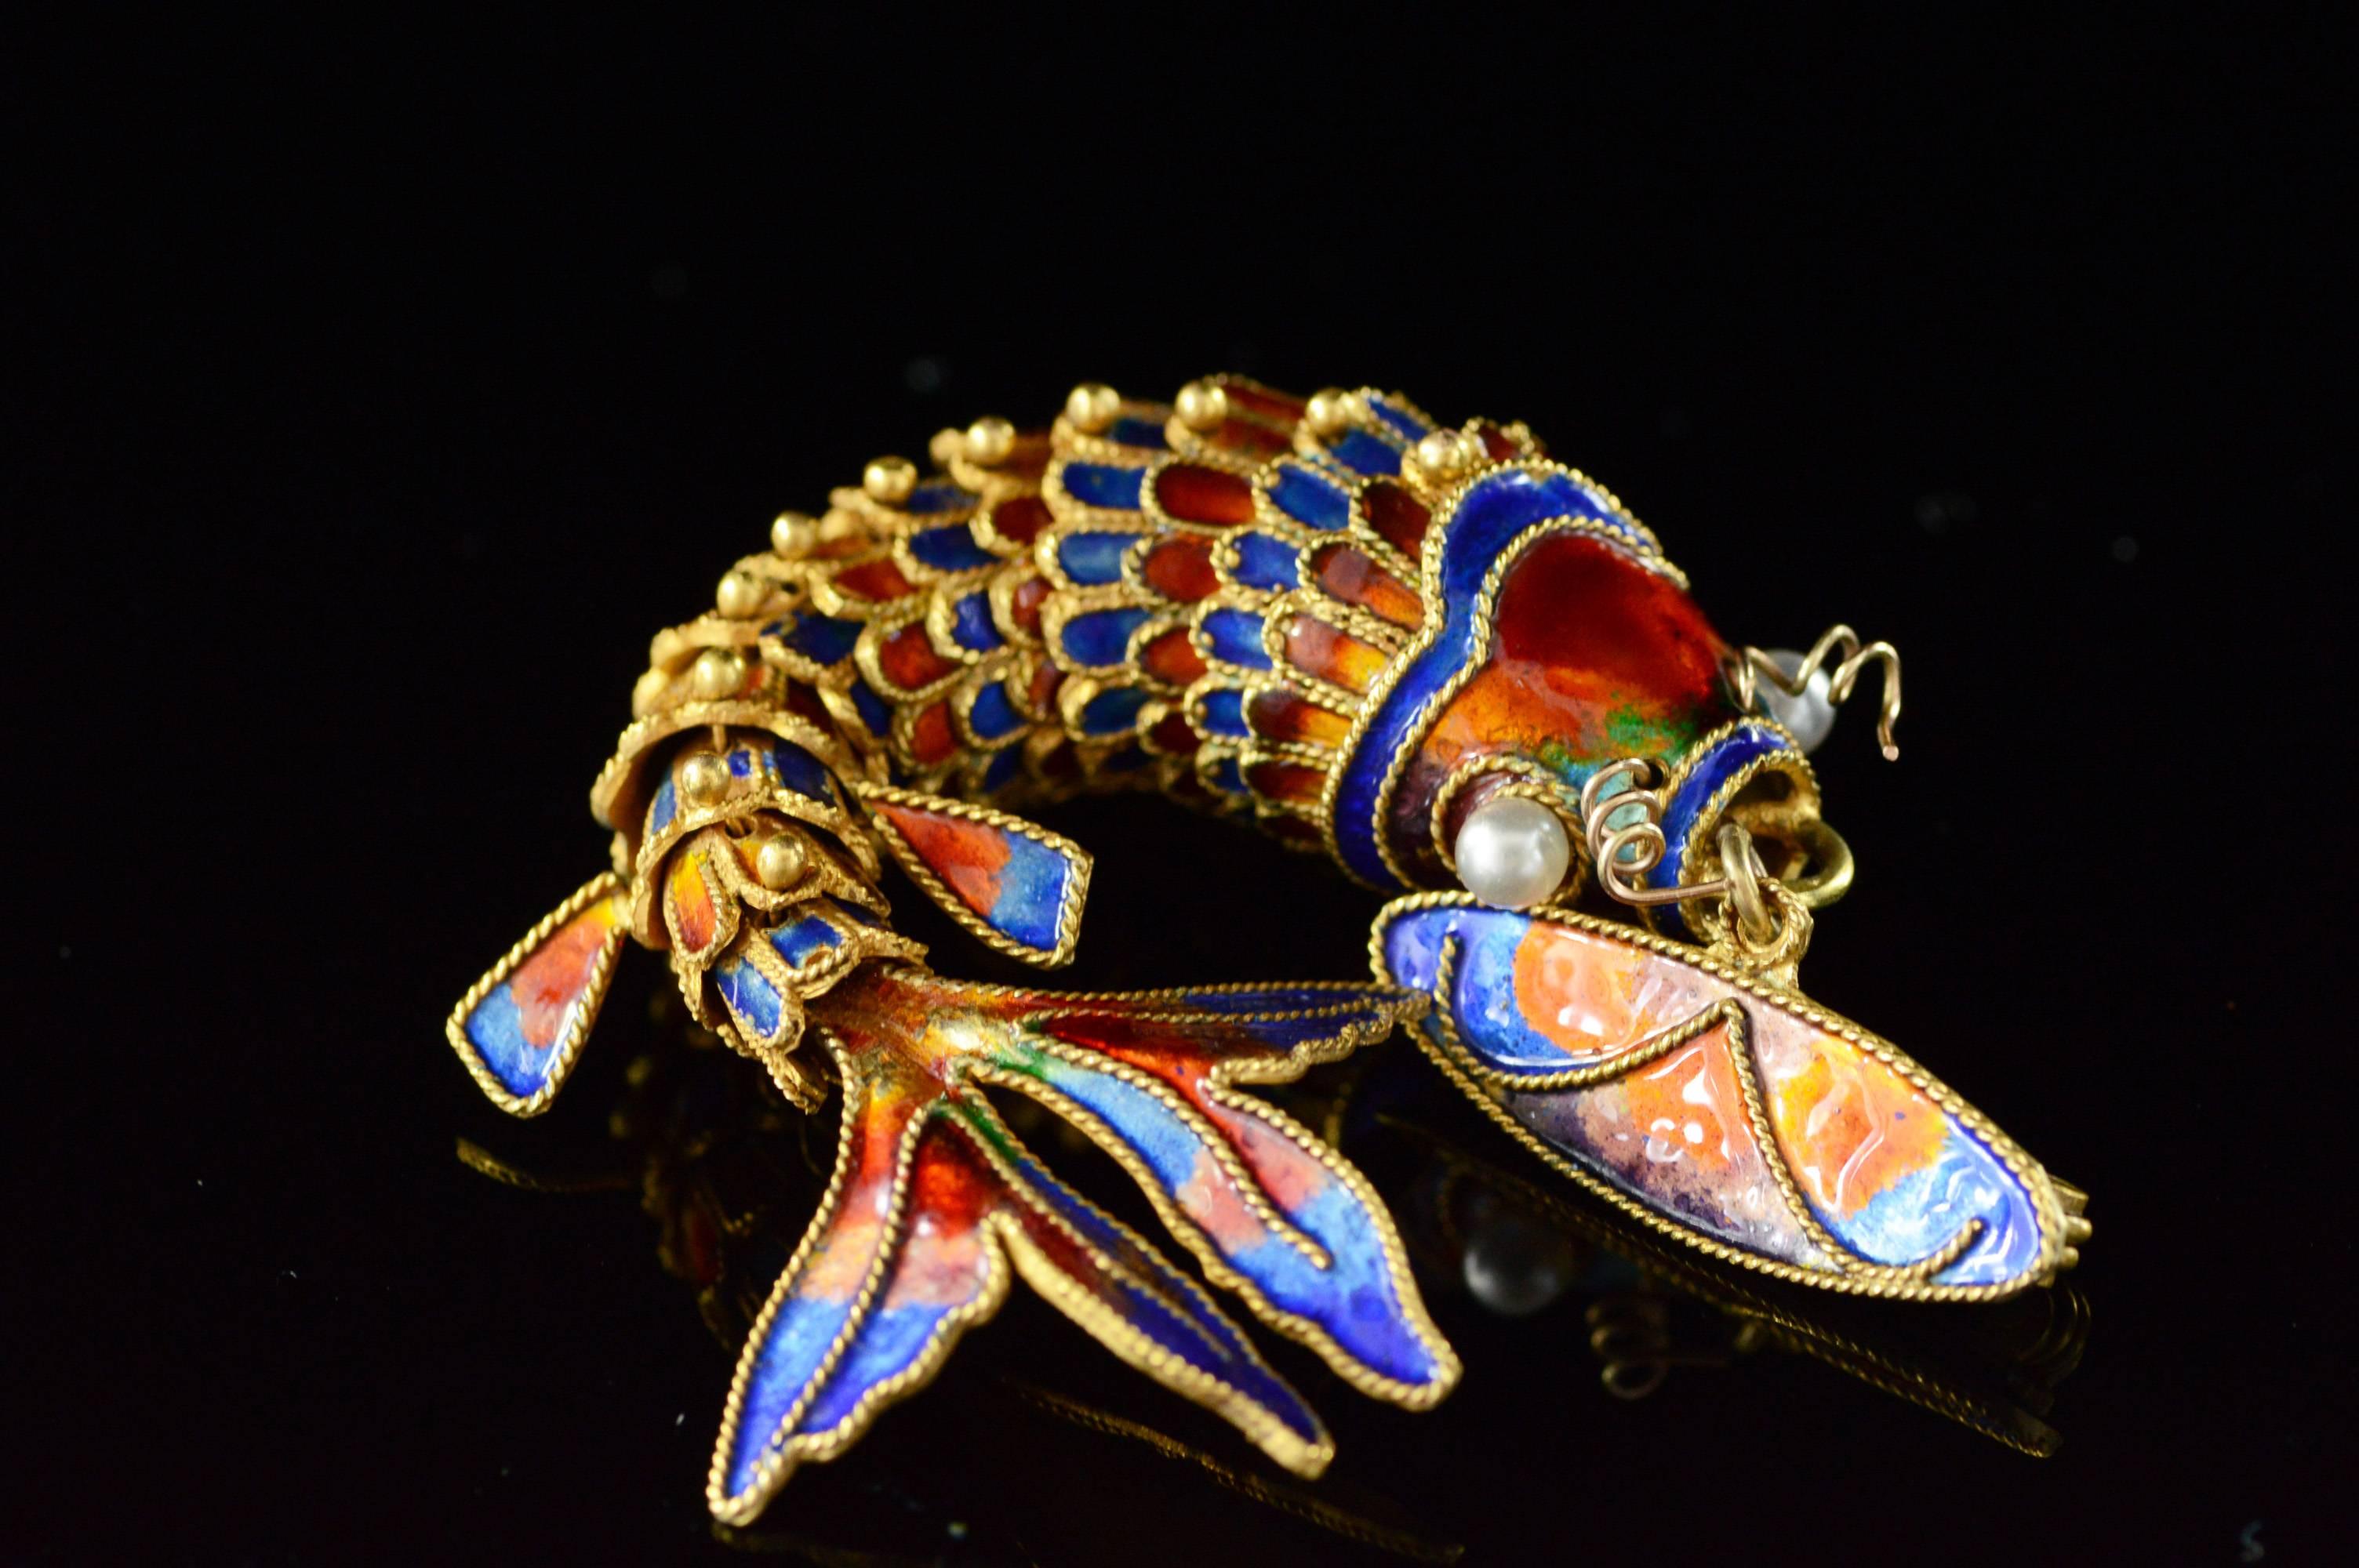 This beautifully hand enameled & articulated koi fish measures almost 9 cm in length. Articulated Koi fish of this size from this era are very rare.

All diamonds are graded according to GIA grading standards.

·Item: 18K Huge - Chinese